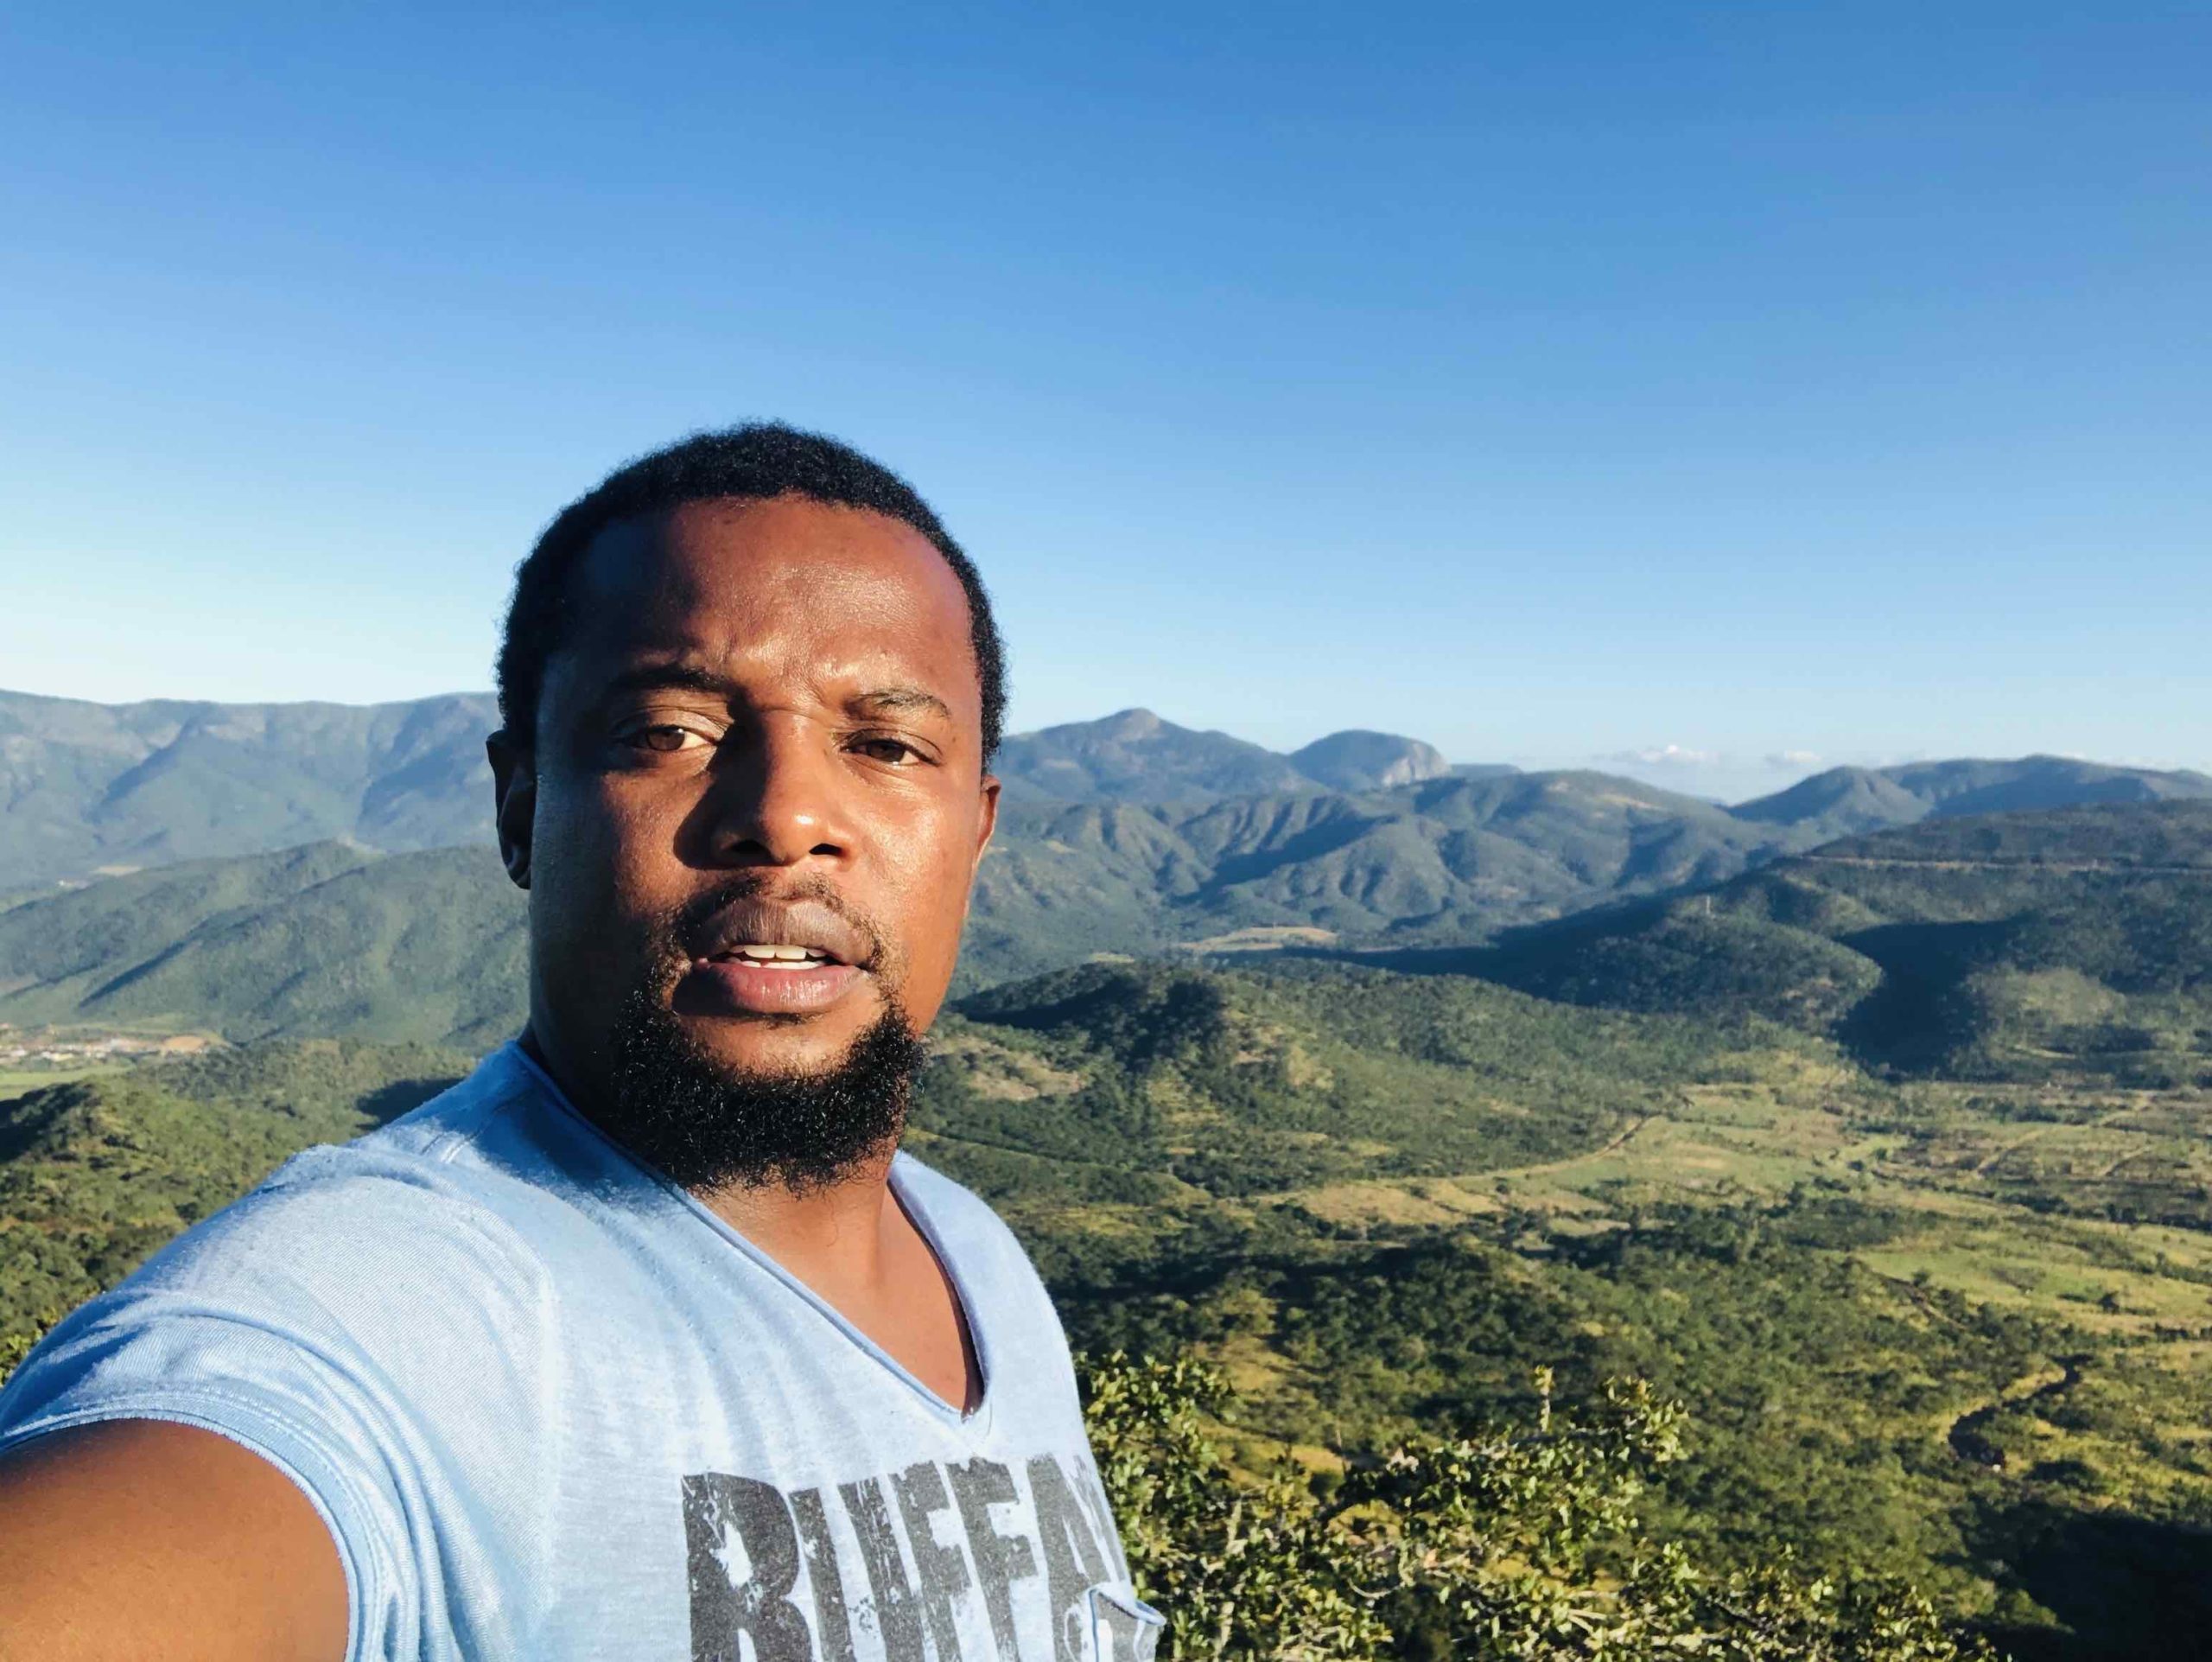 For the love of the Eastern Highlands